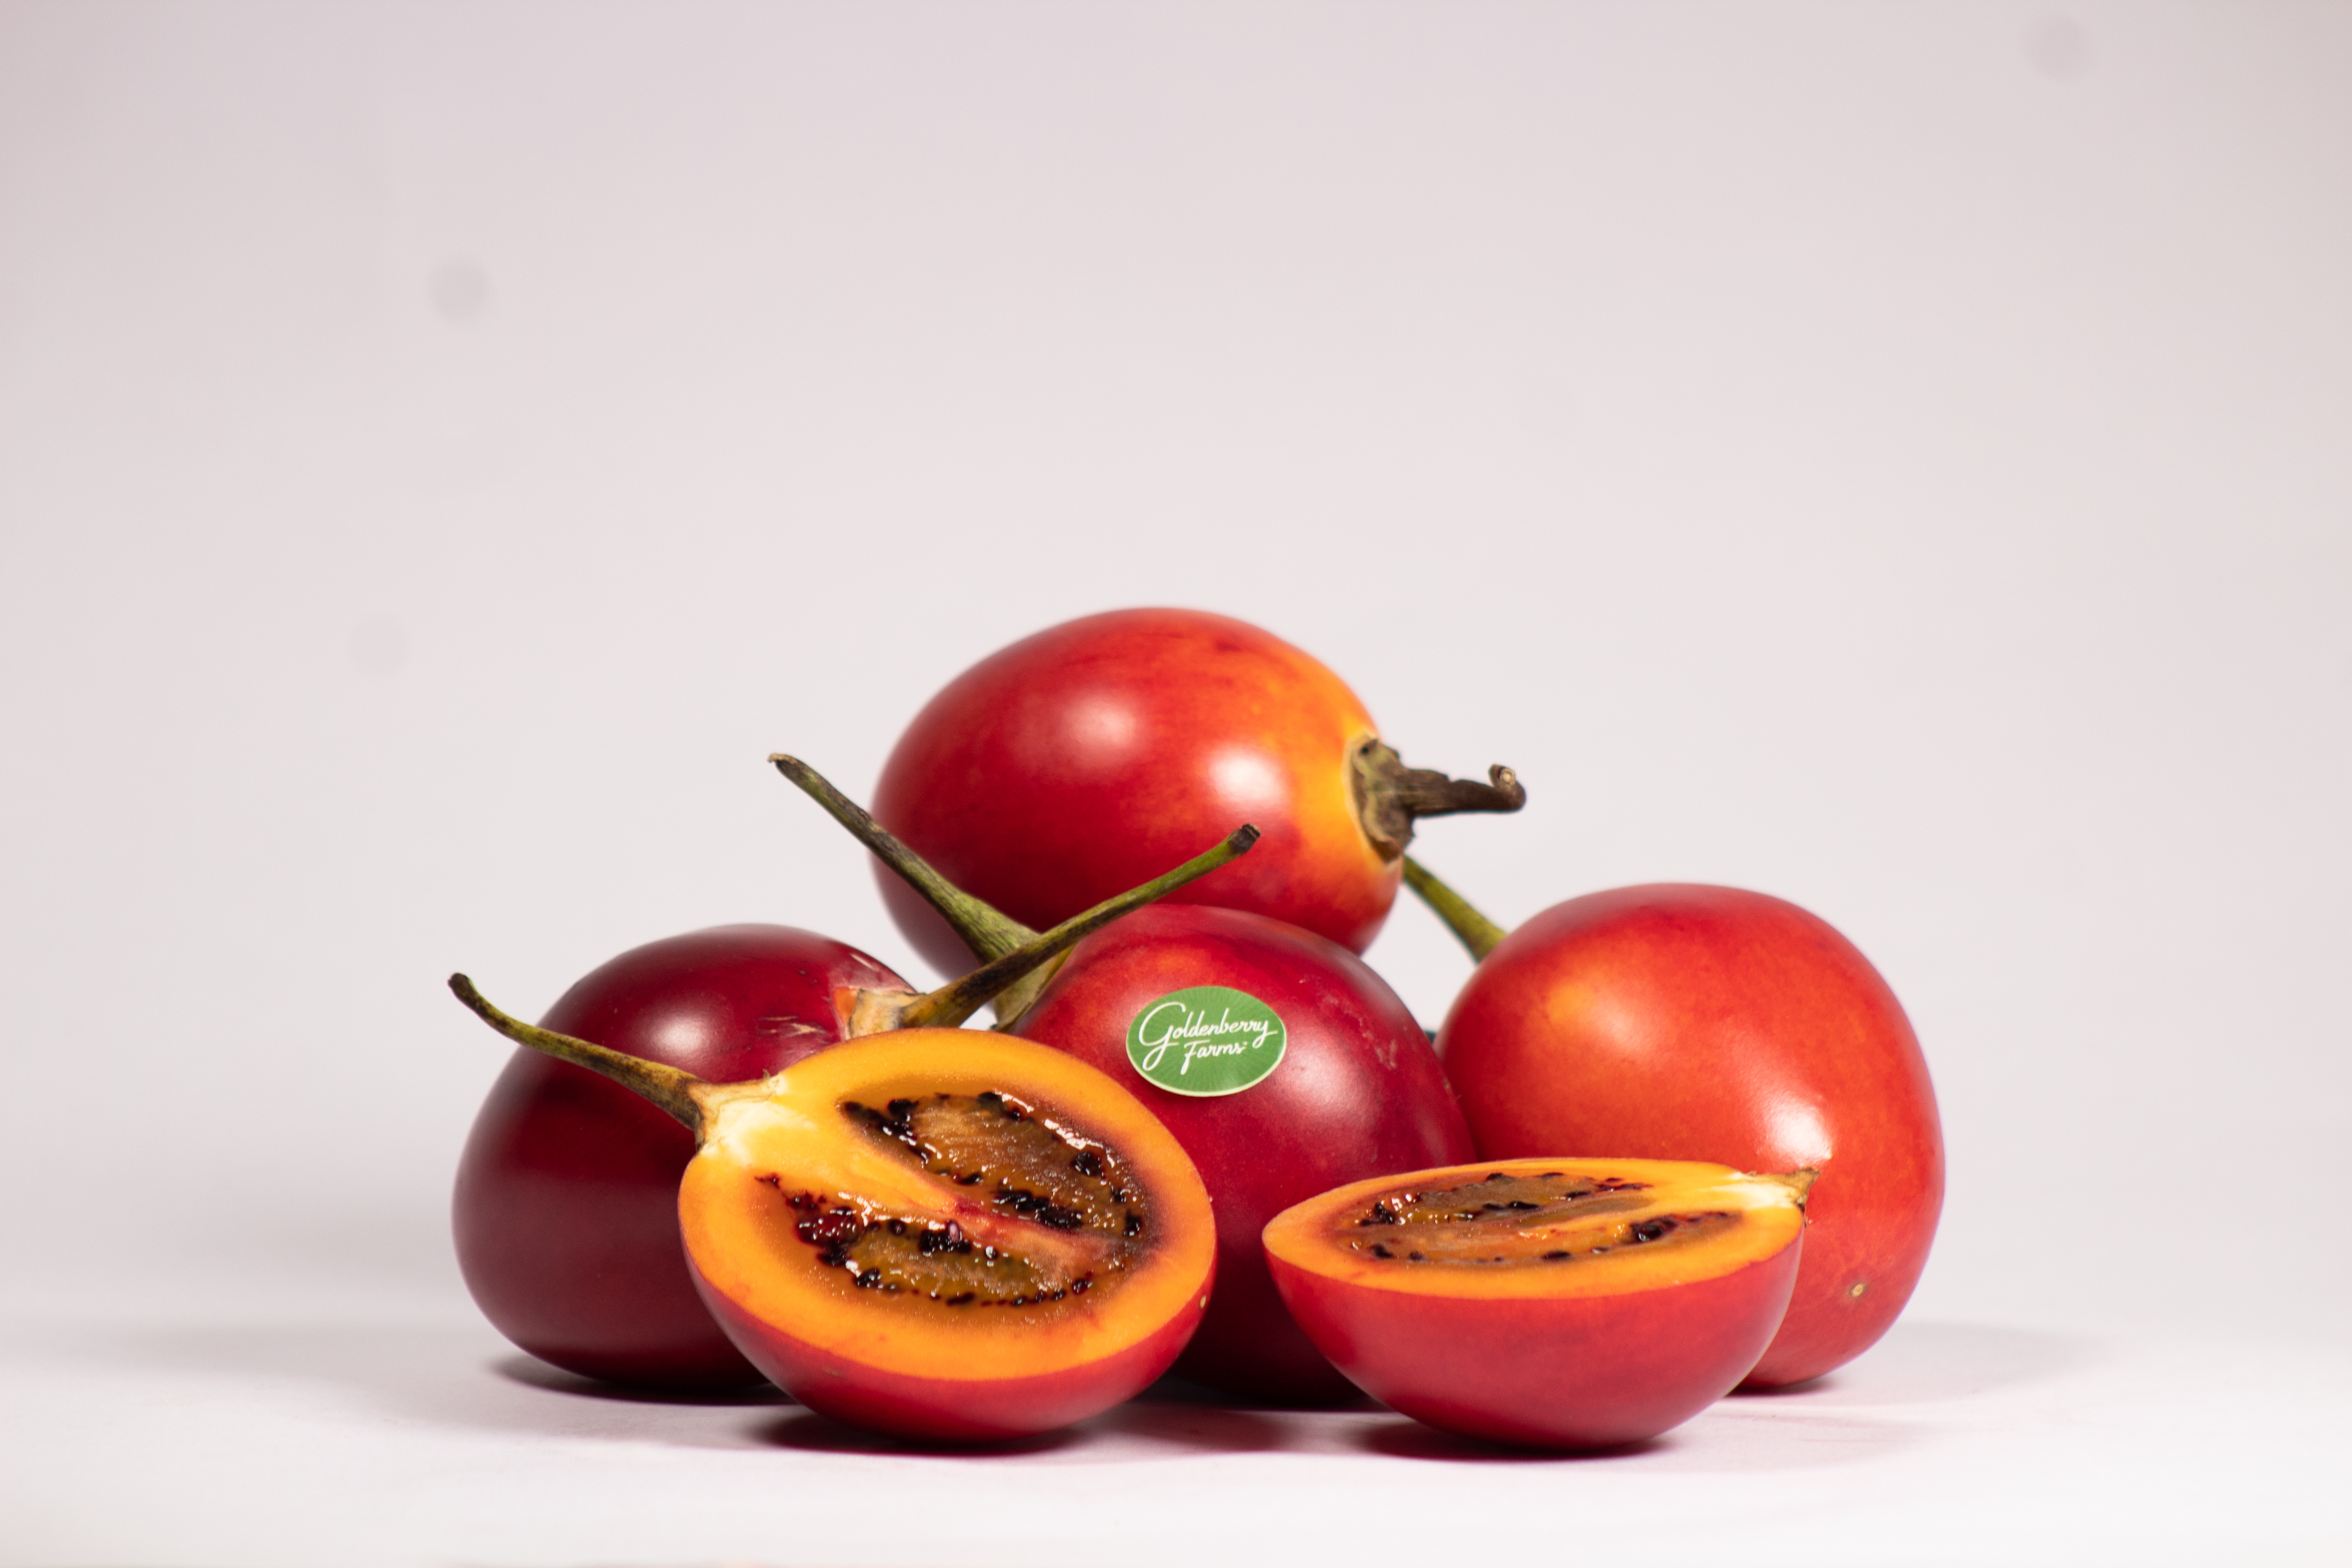 Tamarillo or tree tomato is grown and exported by Goldenberry Farms Image